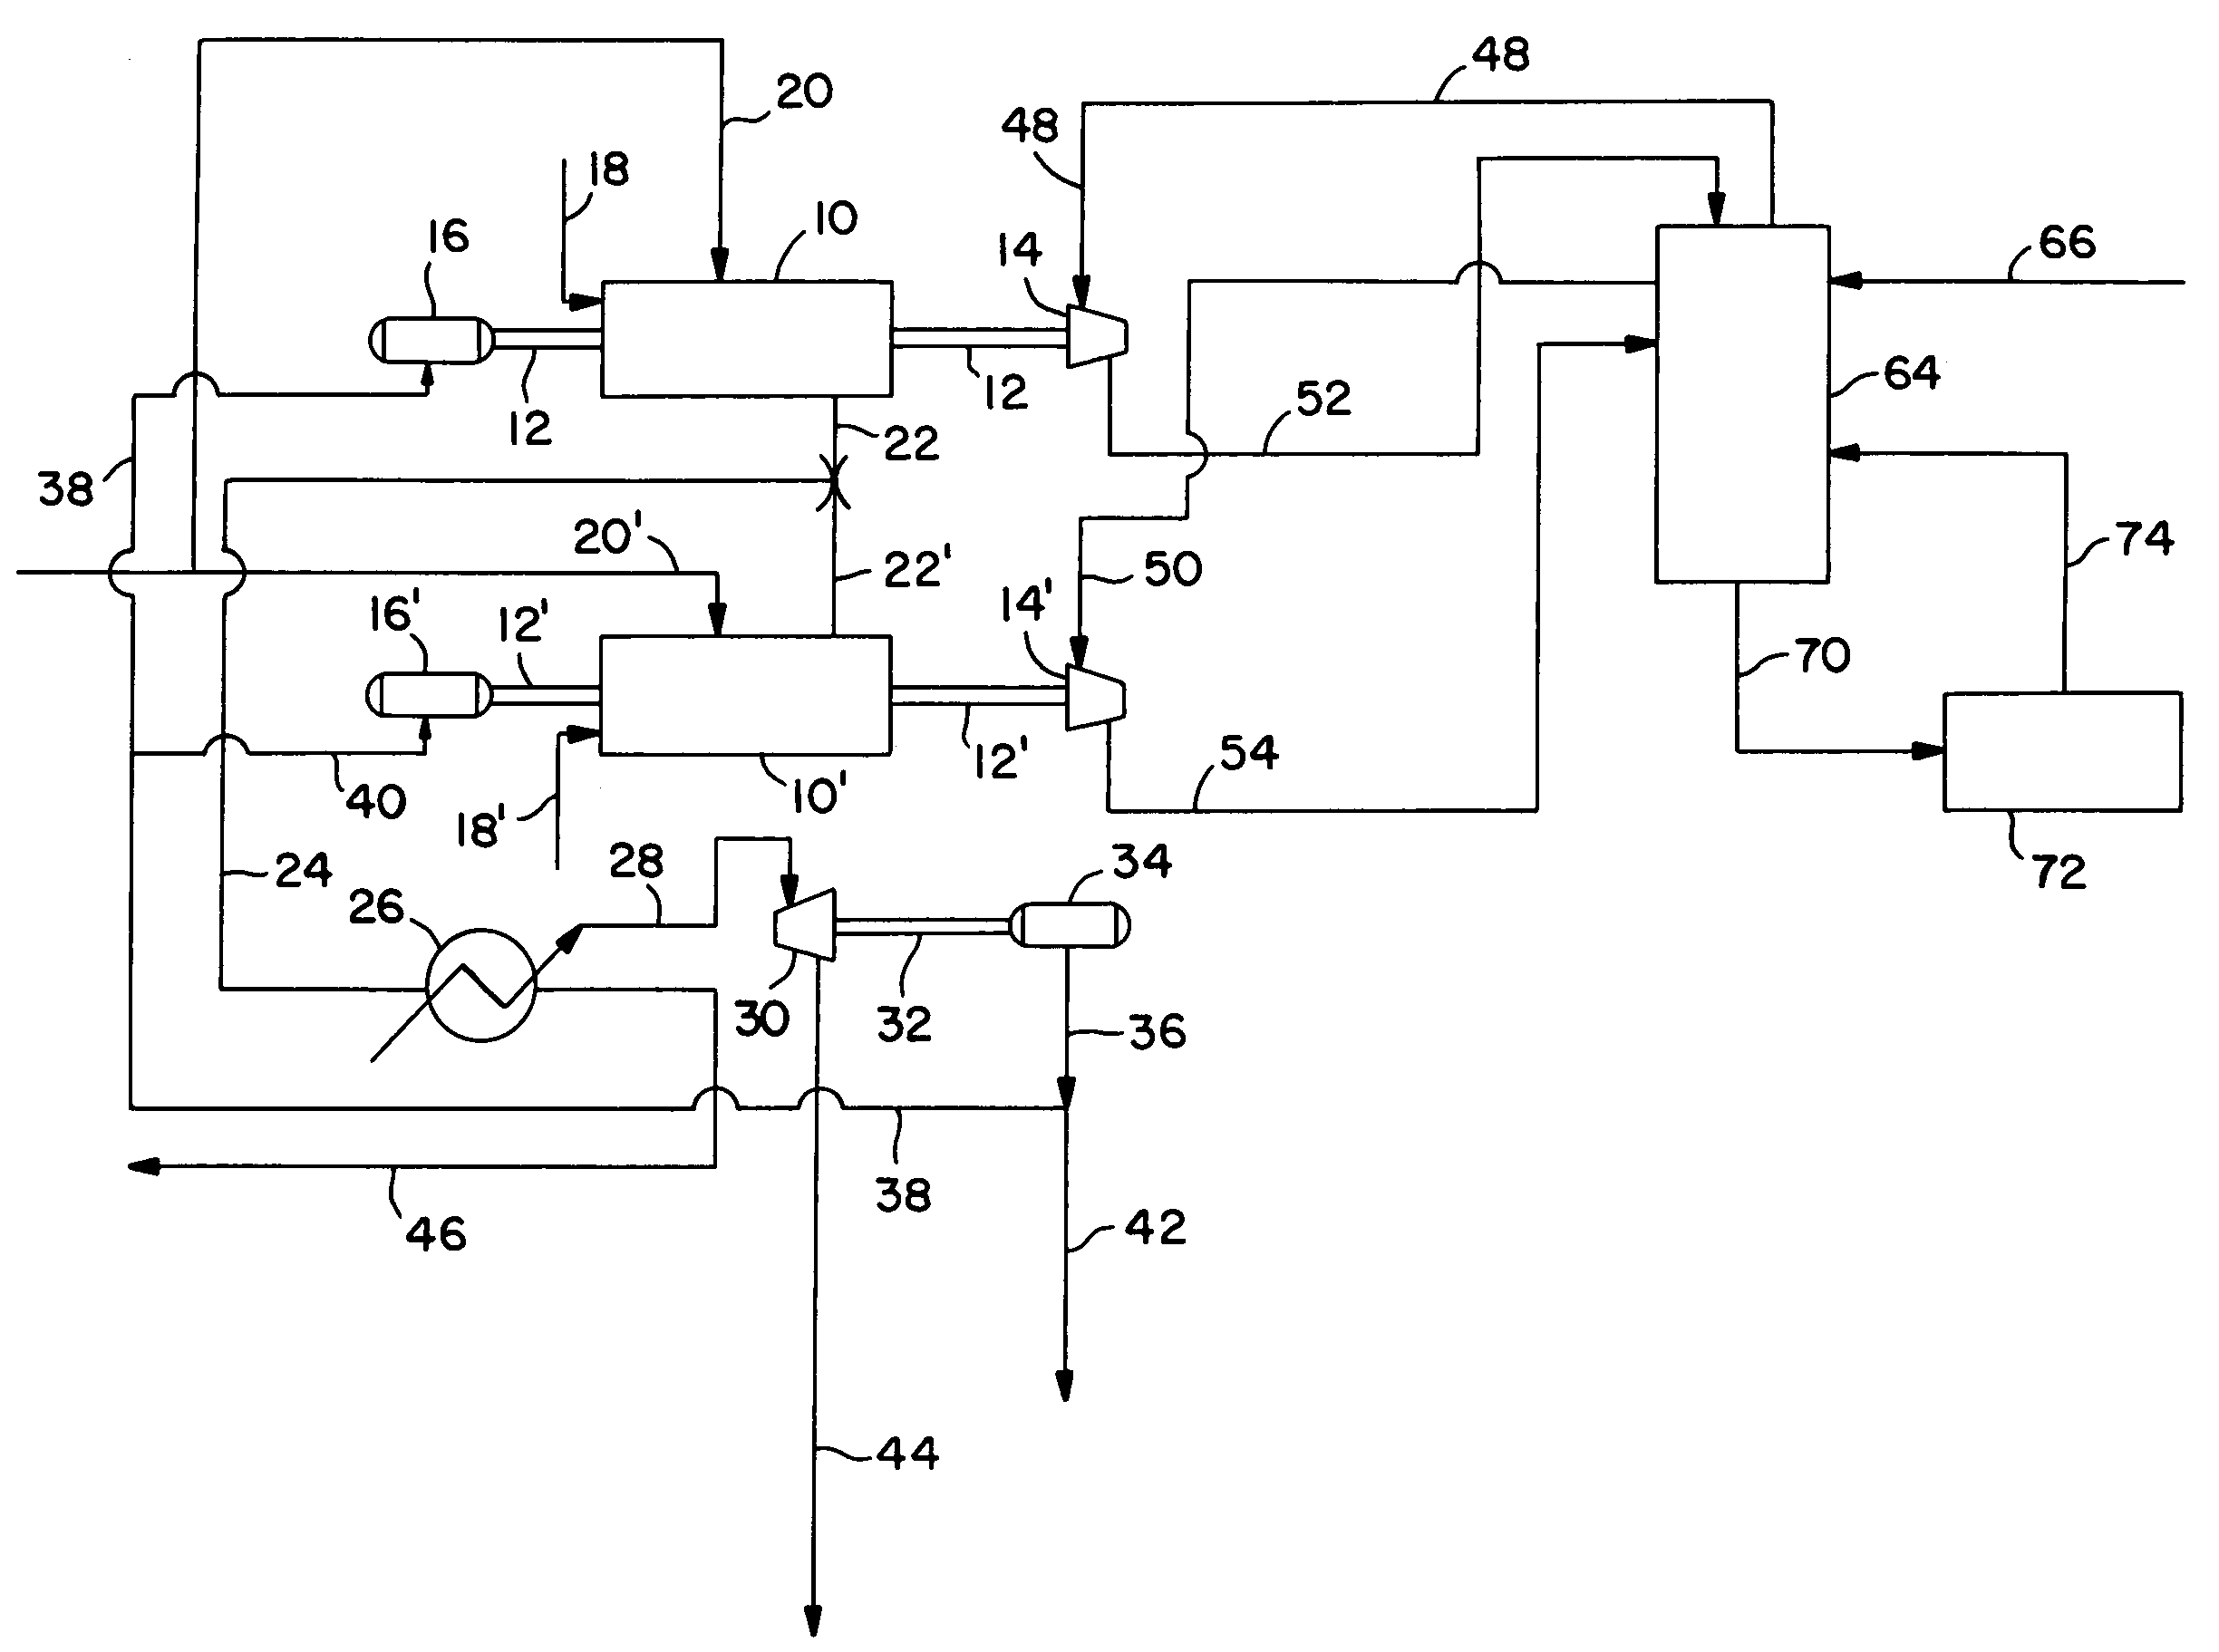 Reduced carbon dioxide emission system and method for providing power for refrigerant compression and electrical power for a light hydrocarbon gas liquefaction process